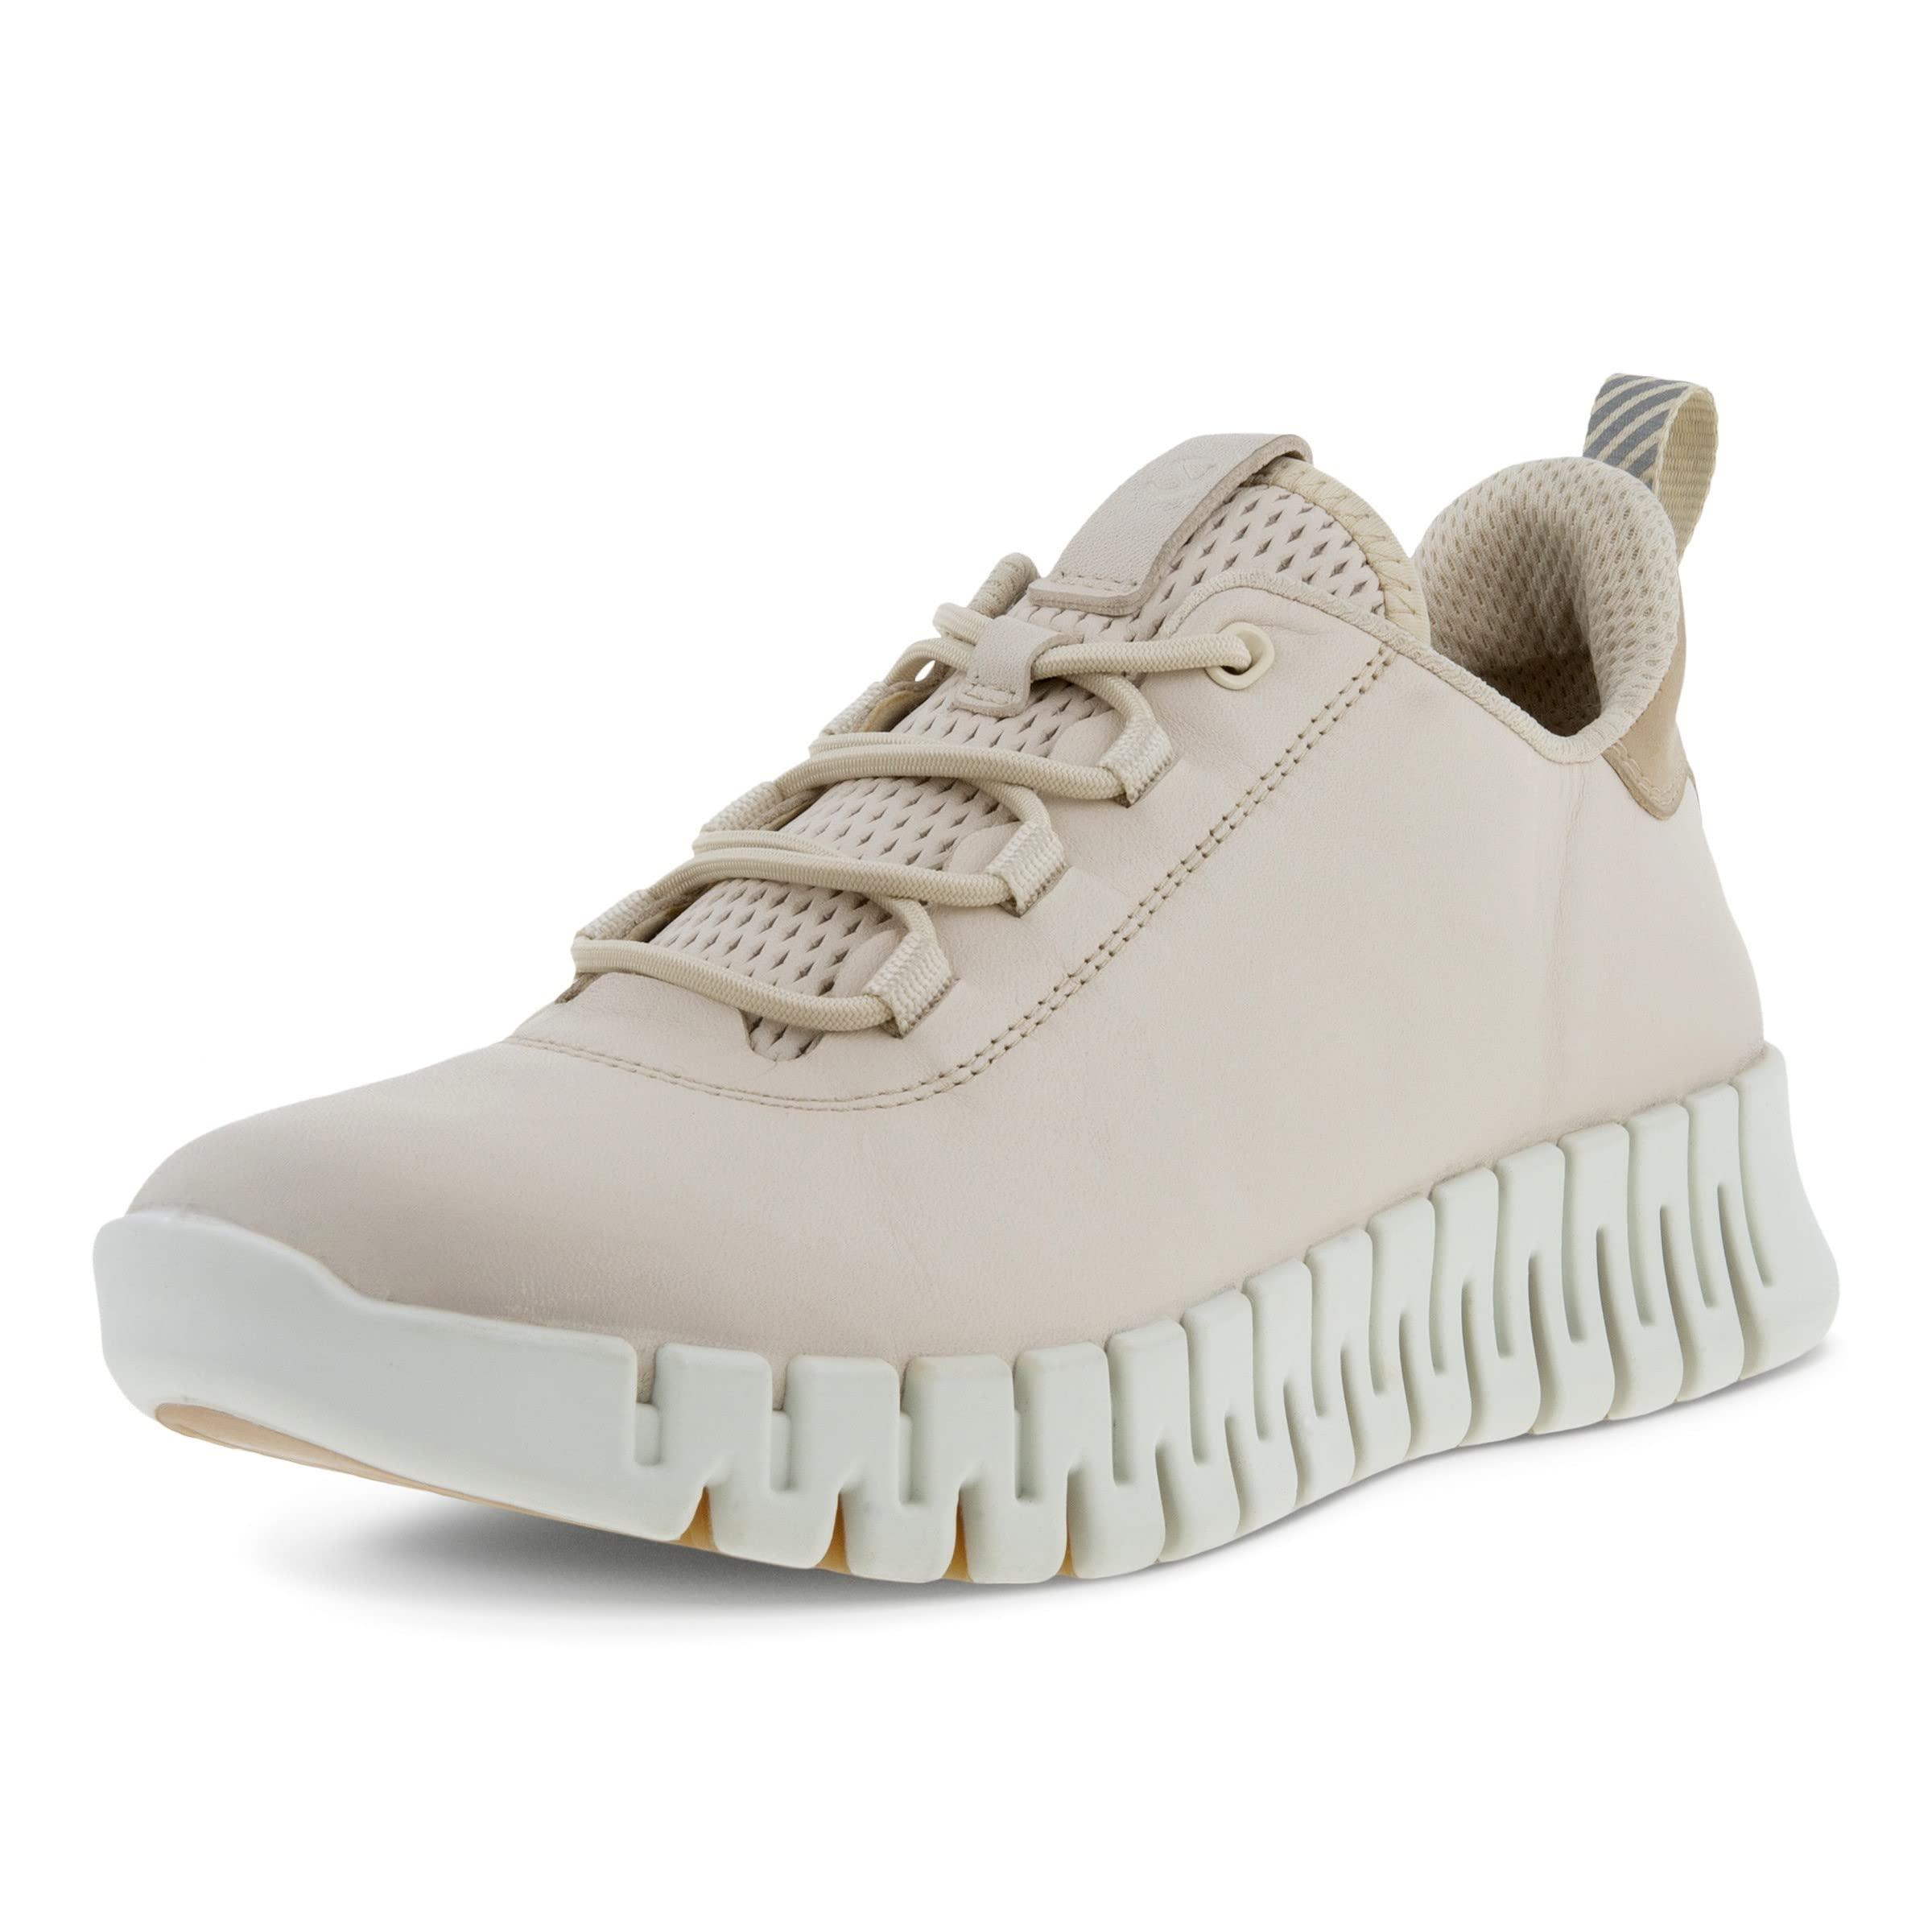 Ecco Gruuv Lace Up Sneaker in Brown | Lyst